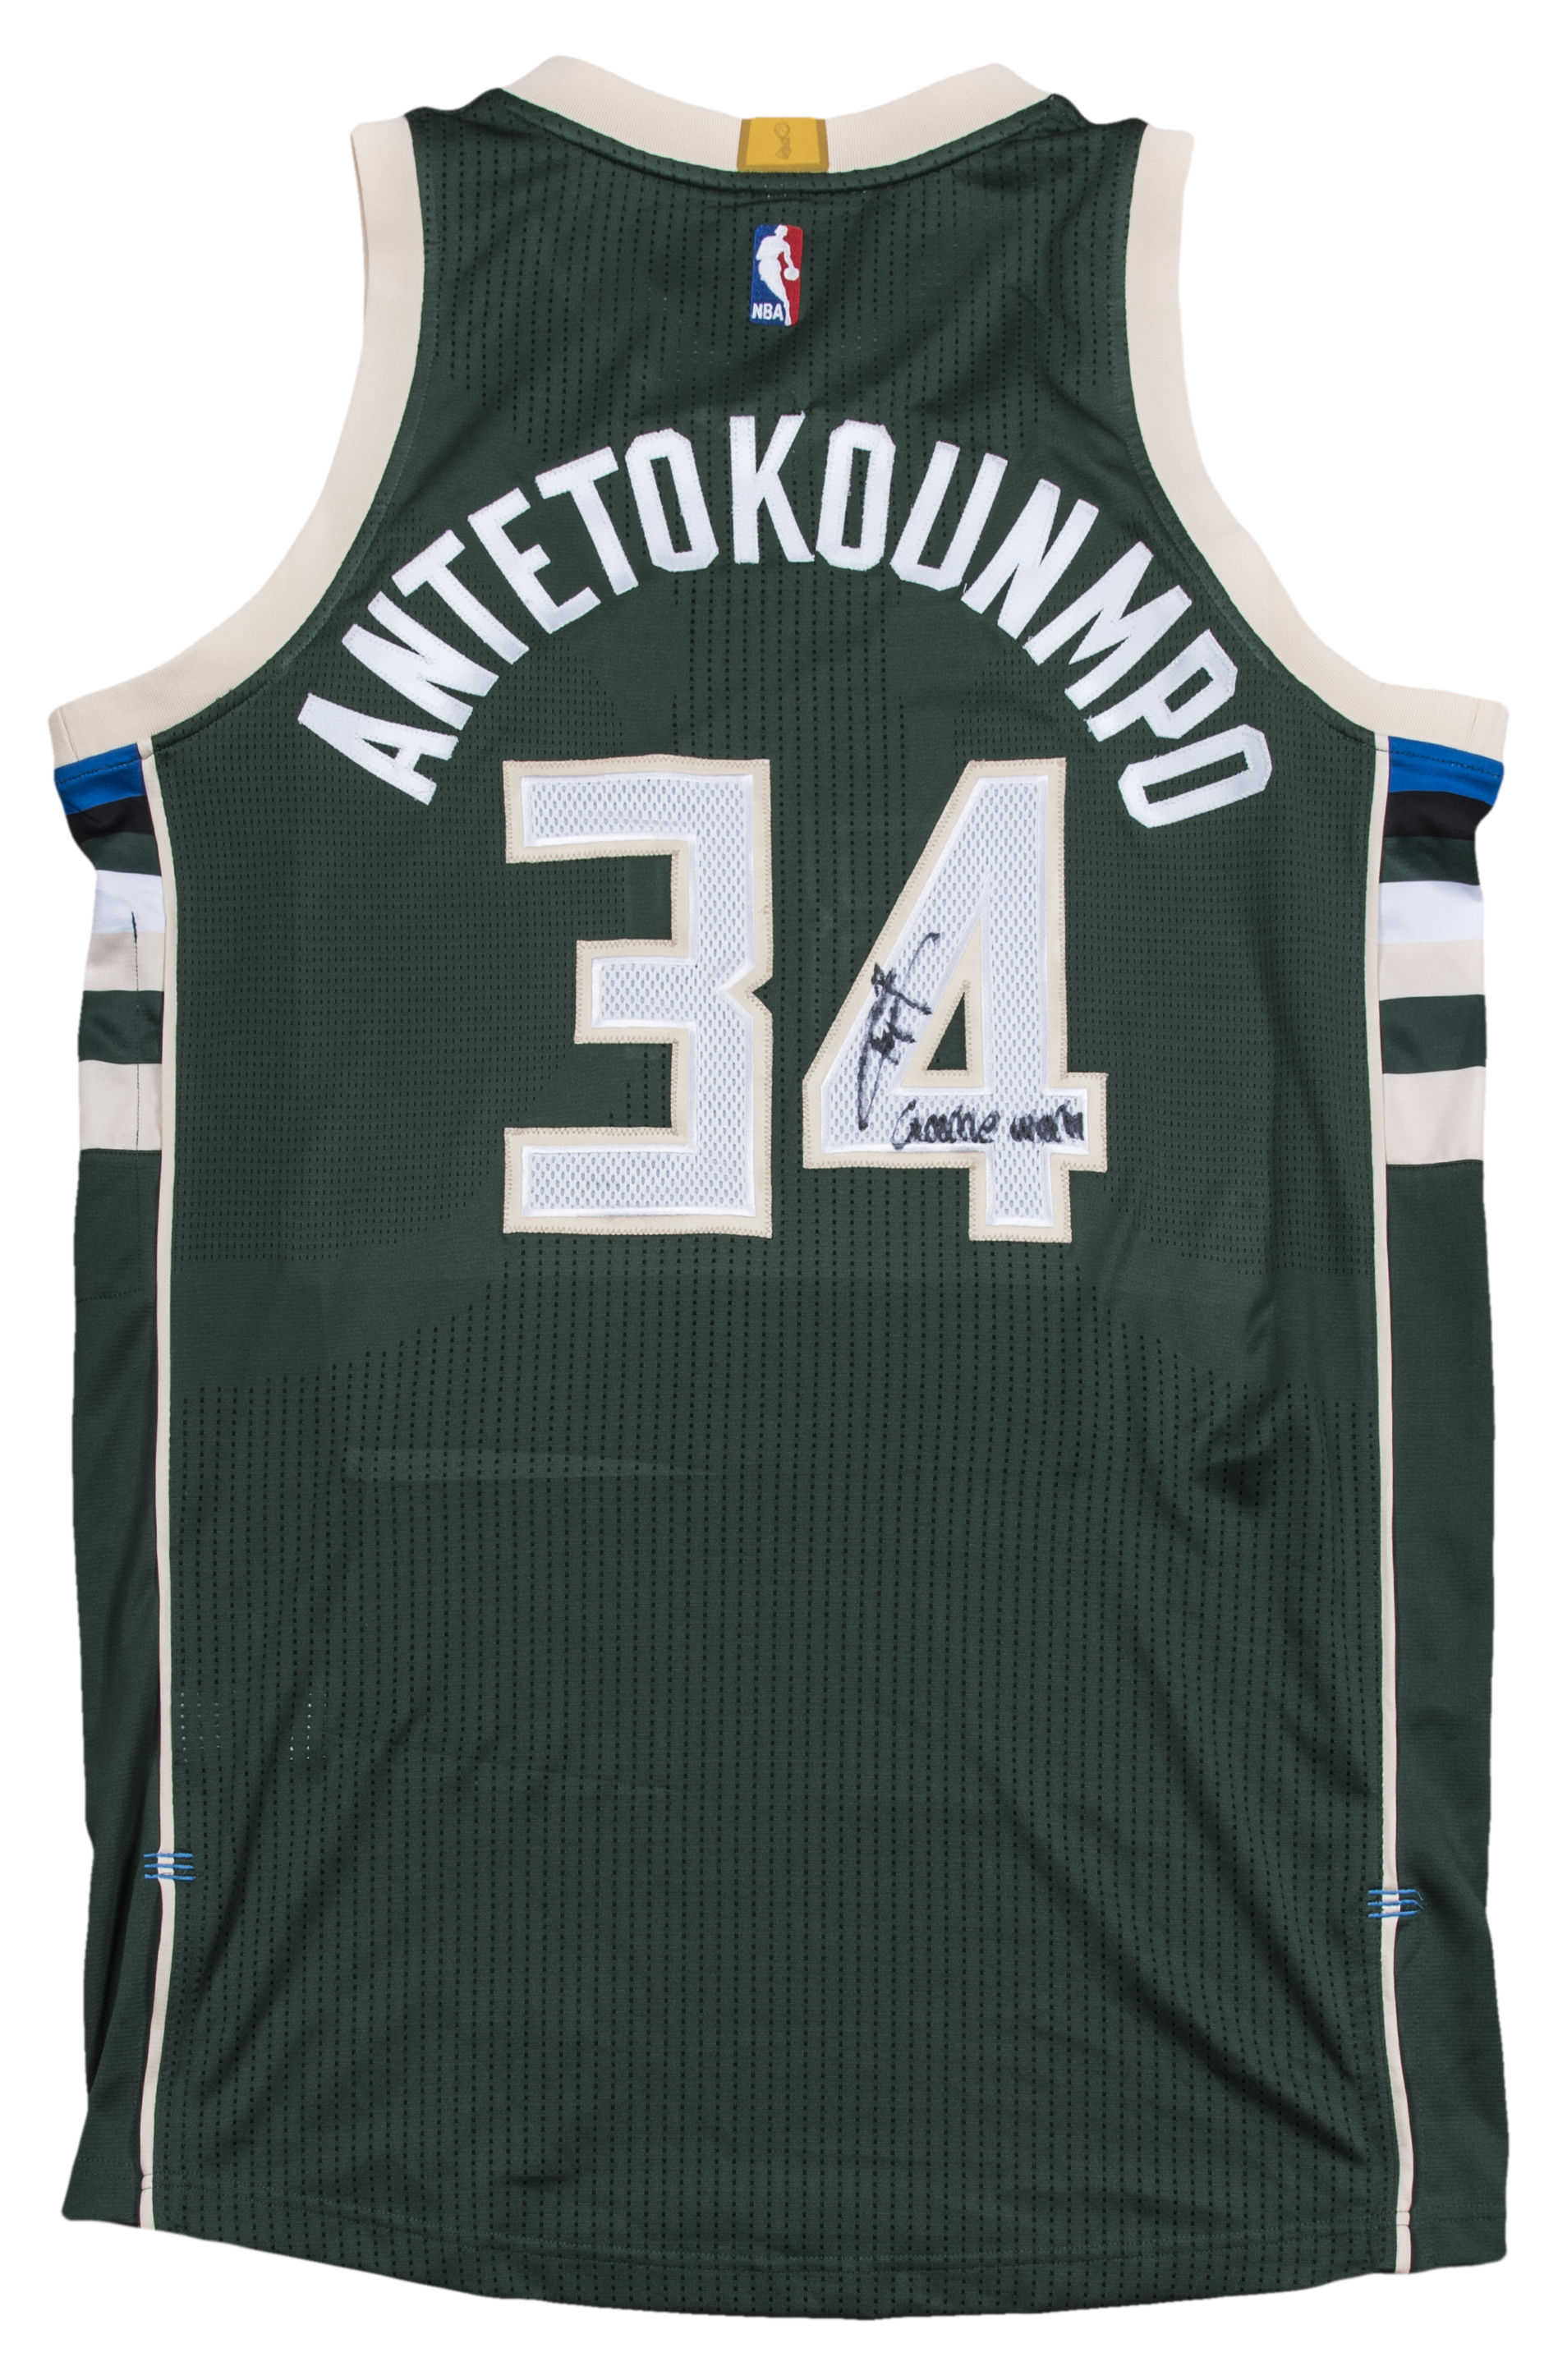 giannis jersey number